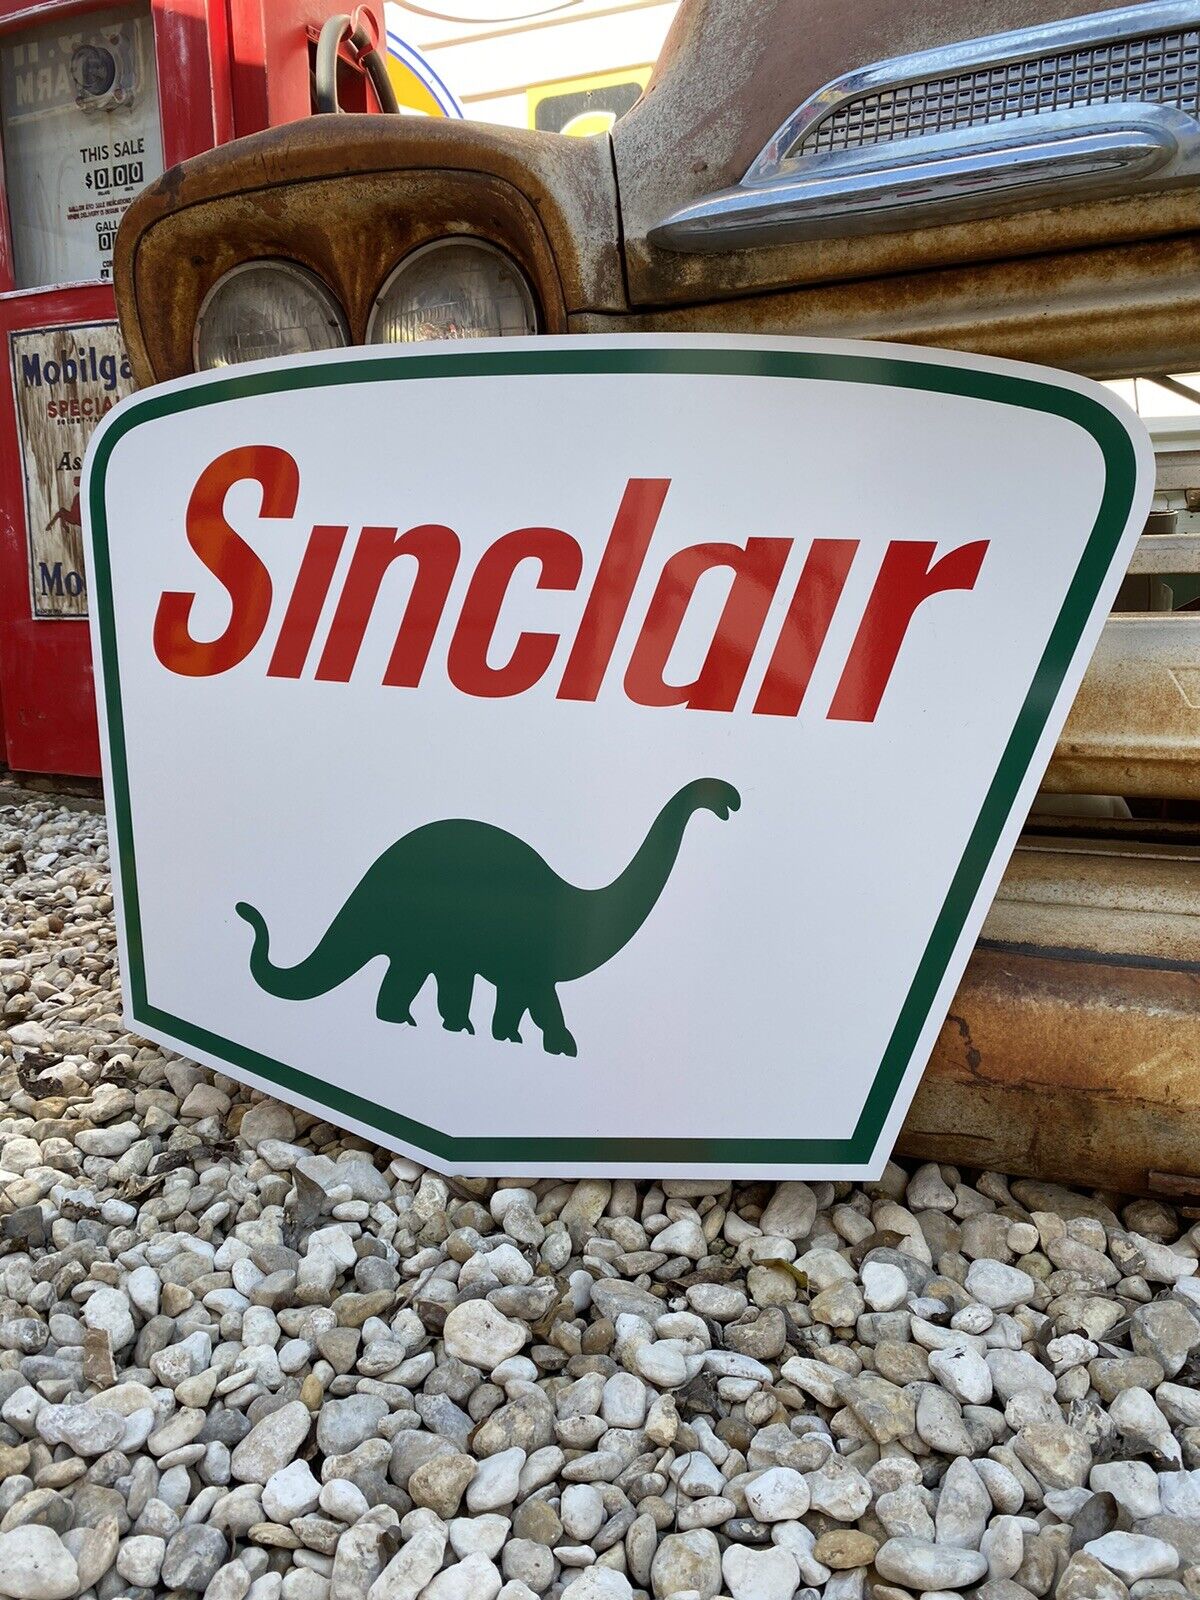 Antique Vintage Old Style Sinclair Sign